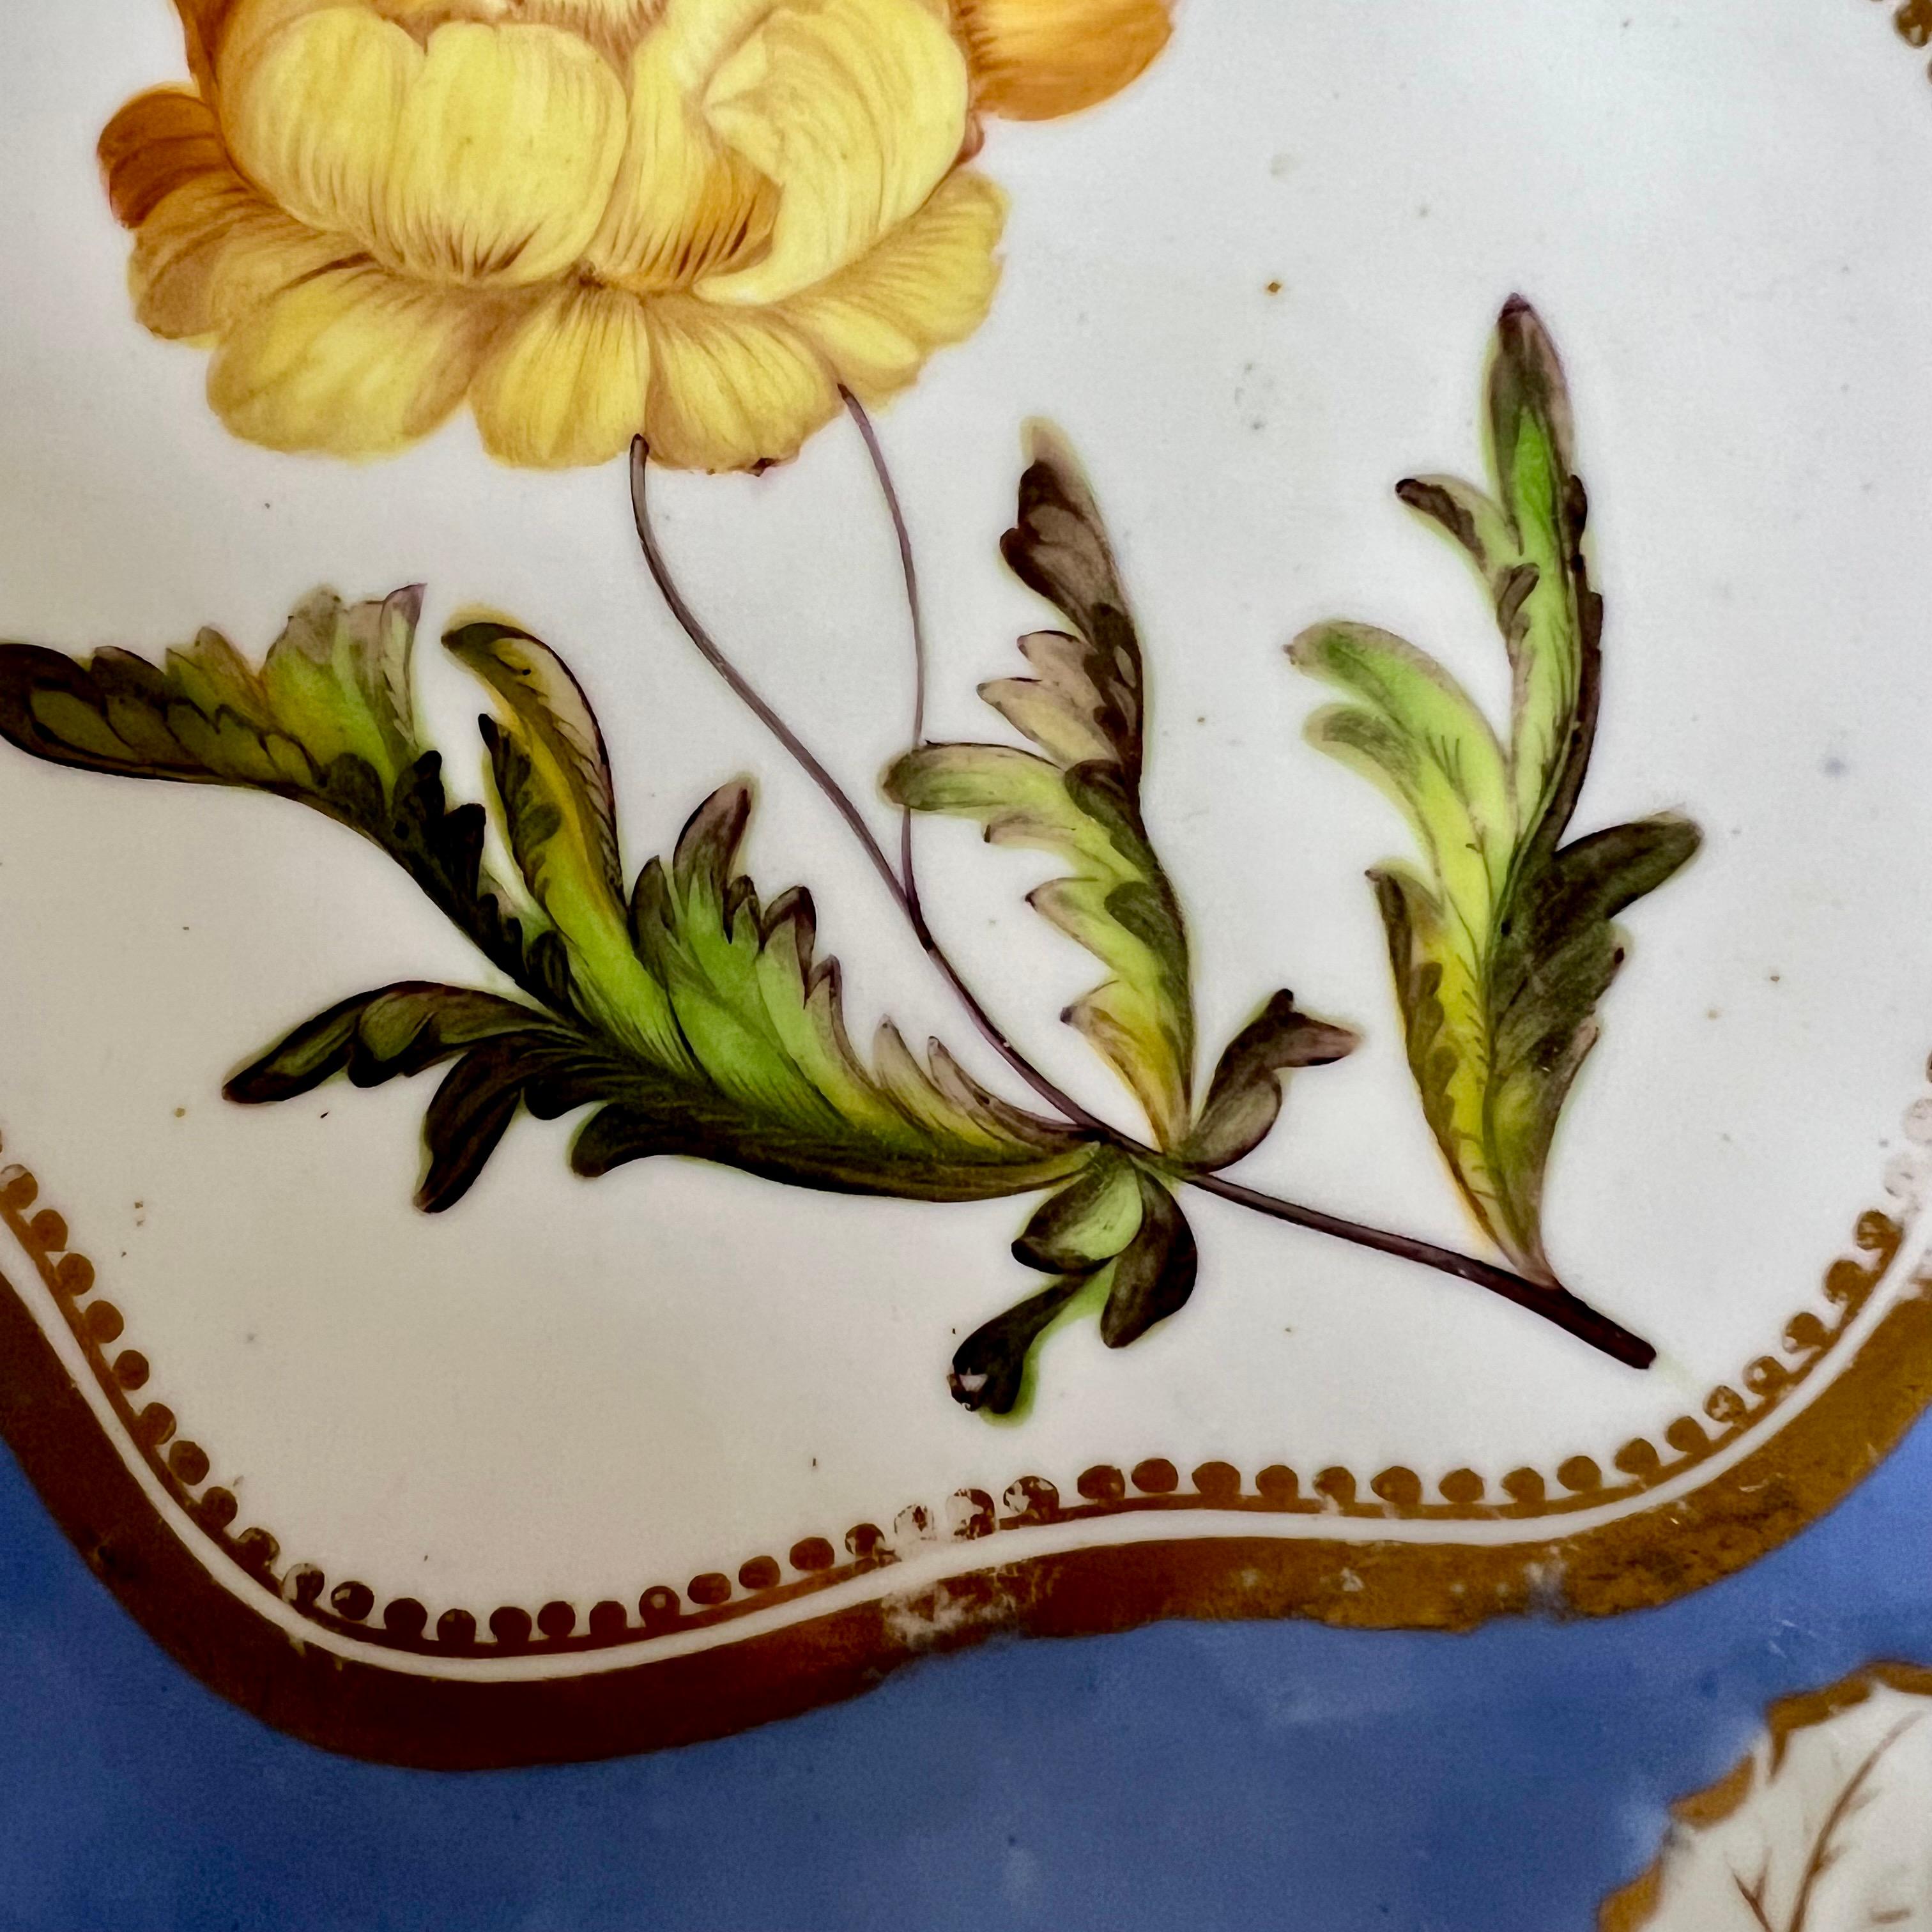 Samuel Alcock Porcelain Leaf Dish, Periwinkle Blue with Yellow Flower, ca 1822 In Good Condition For Sale In London, GB